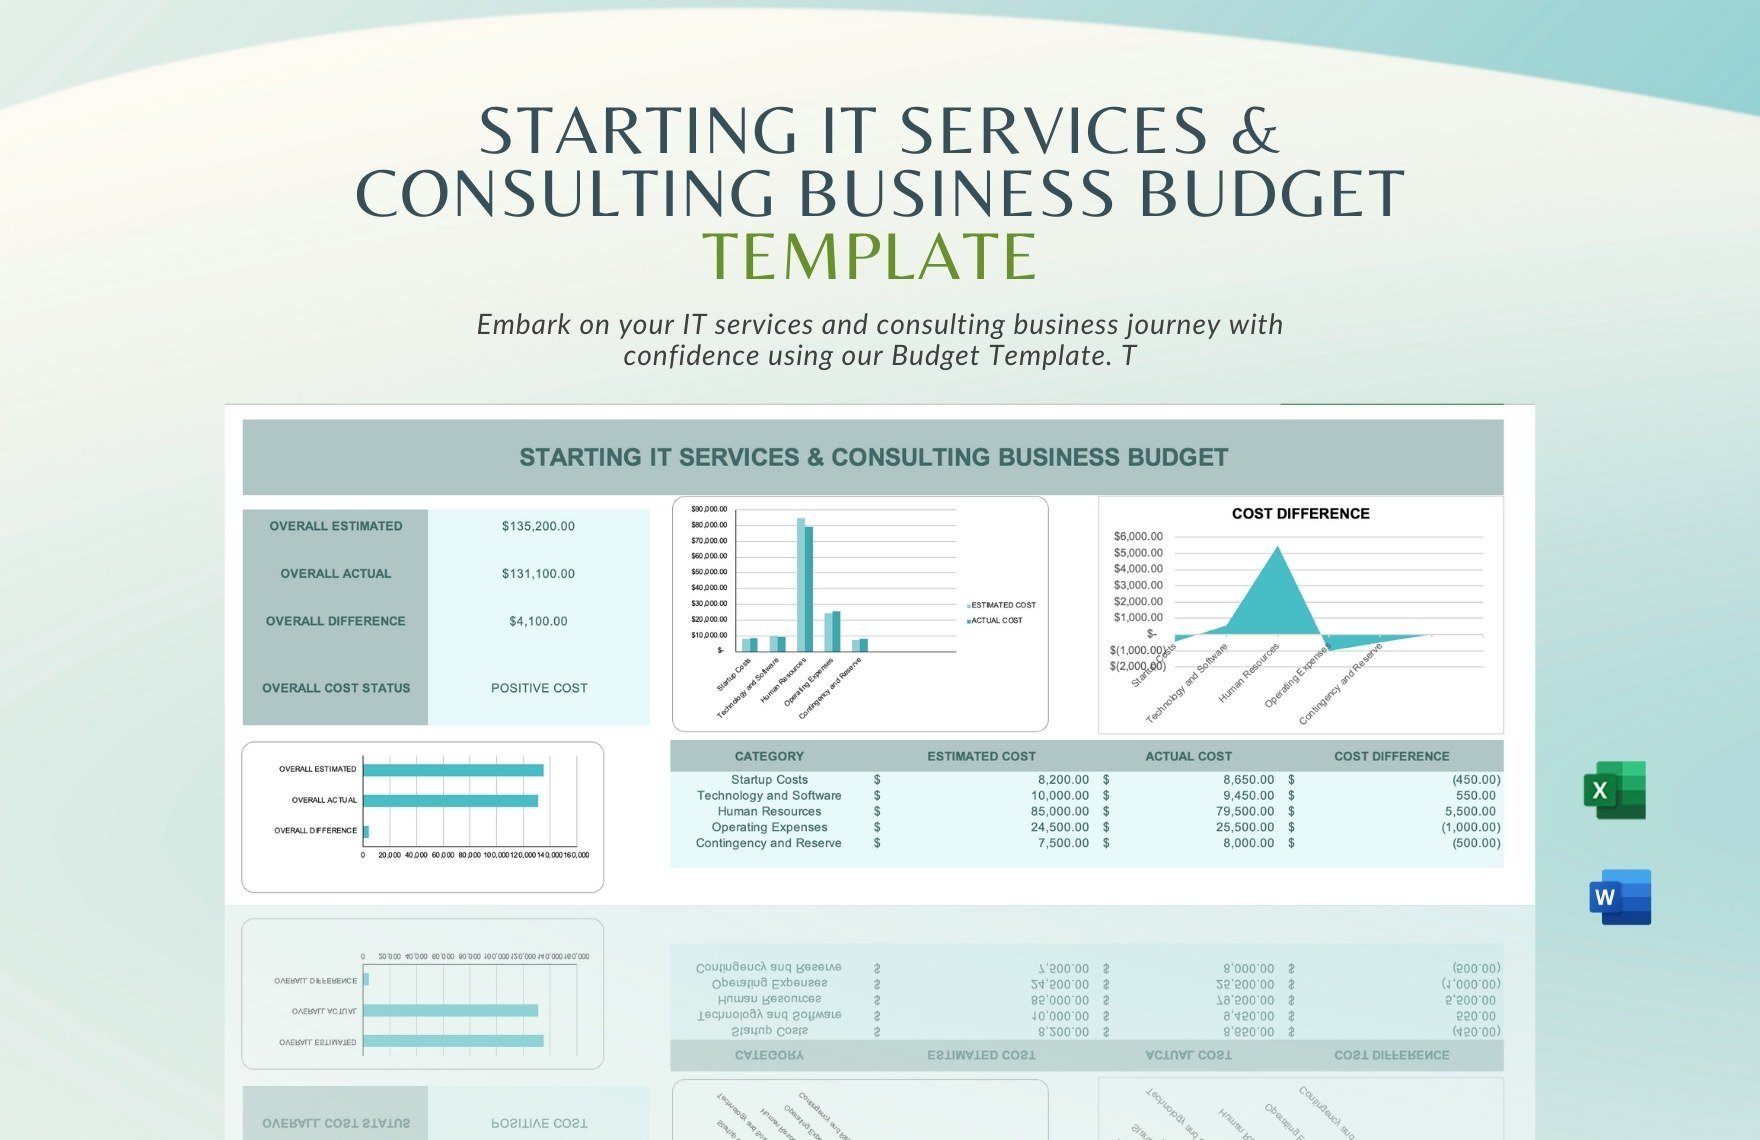 Starting IT Services & Consulting Business Budget Template in Google Docs, Excel